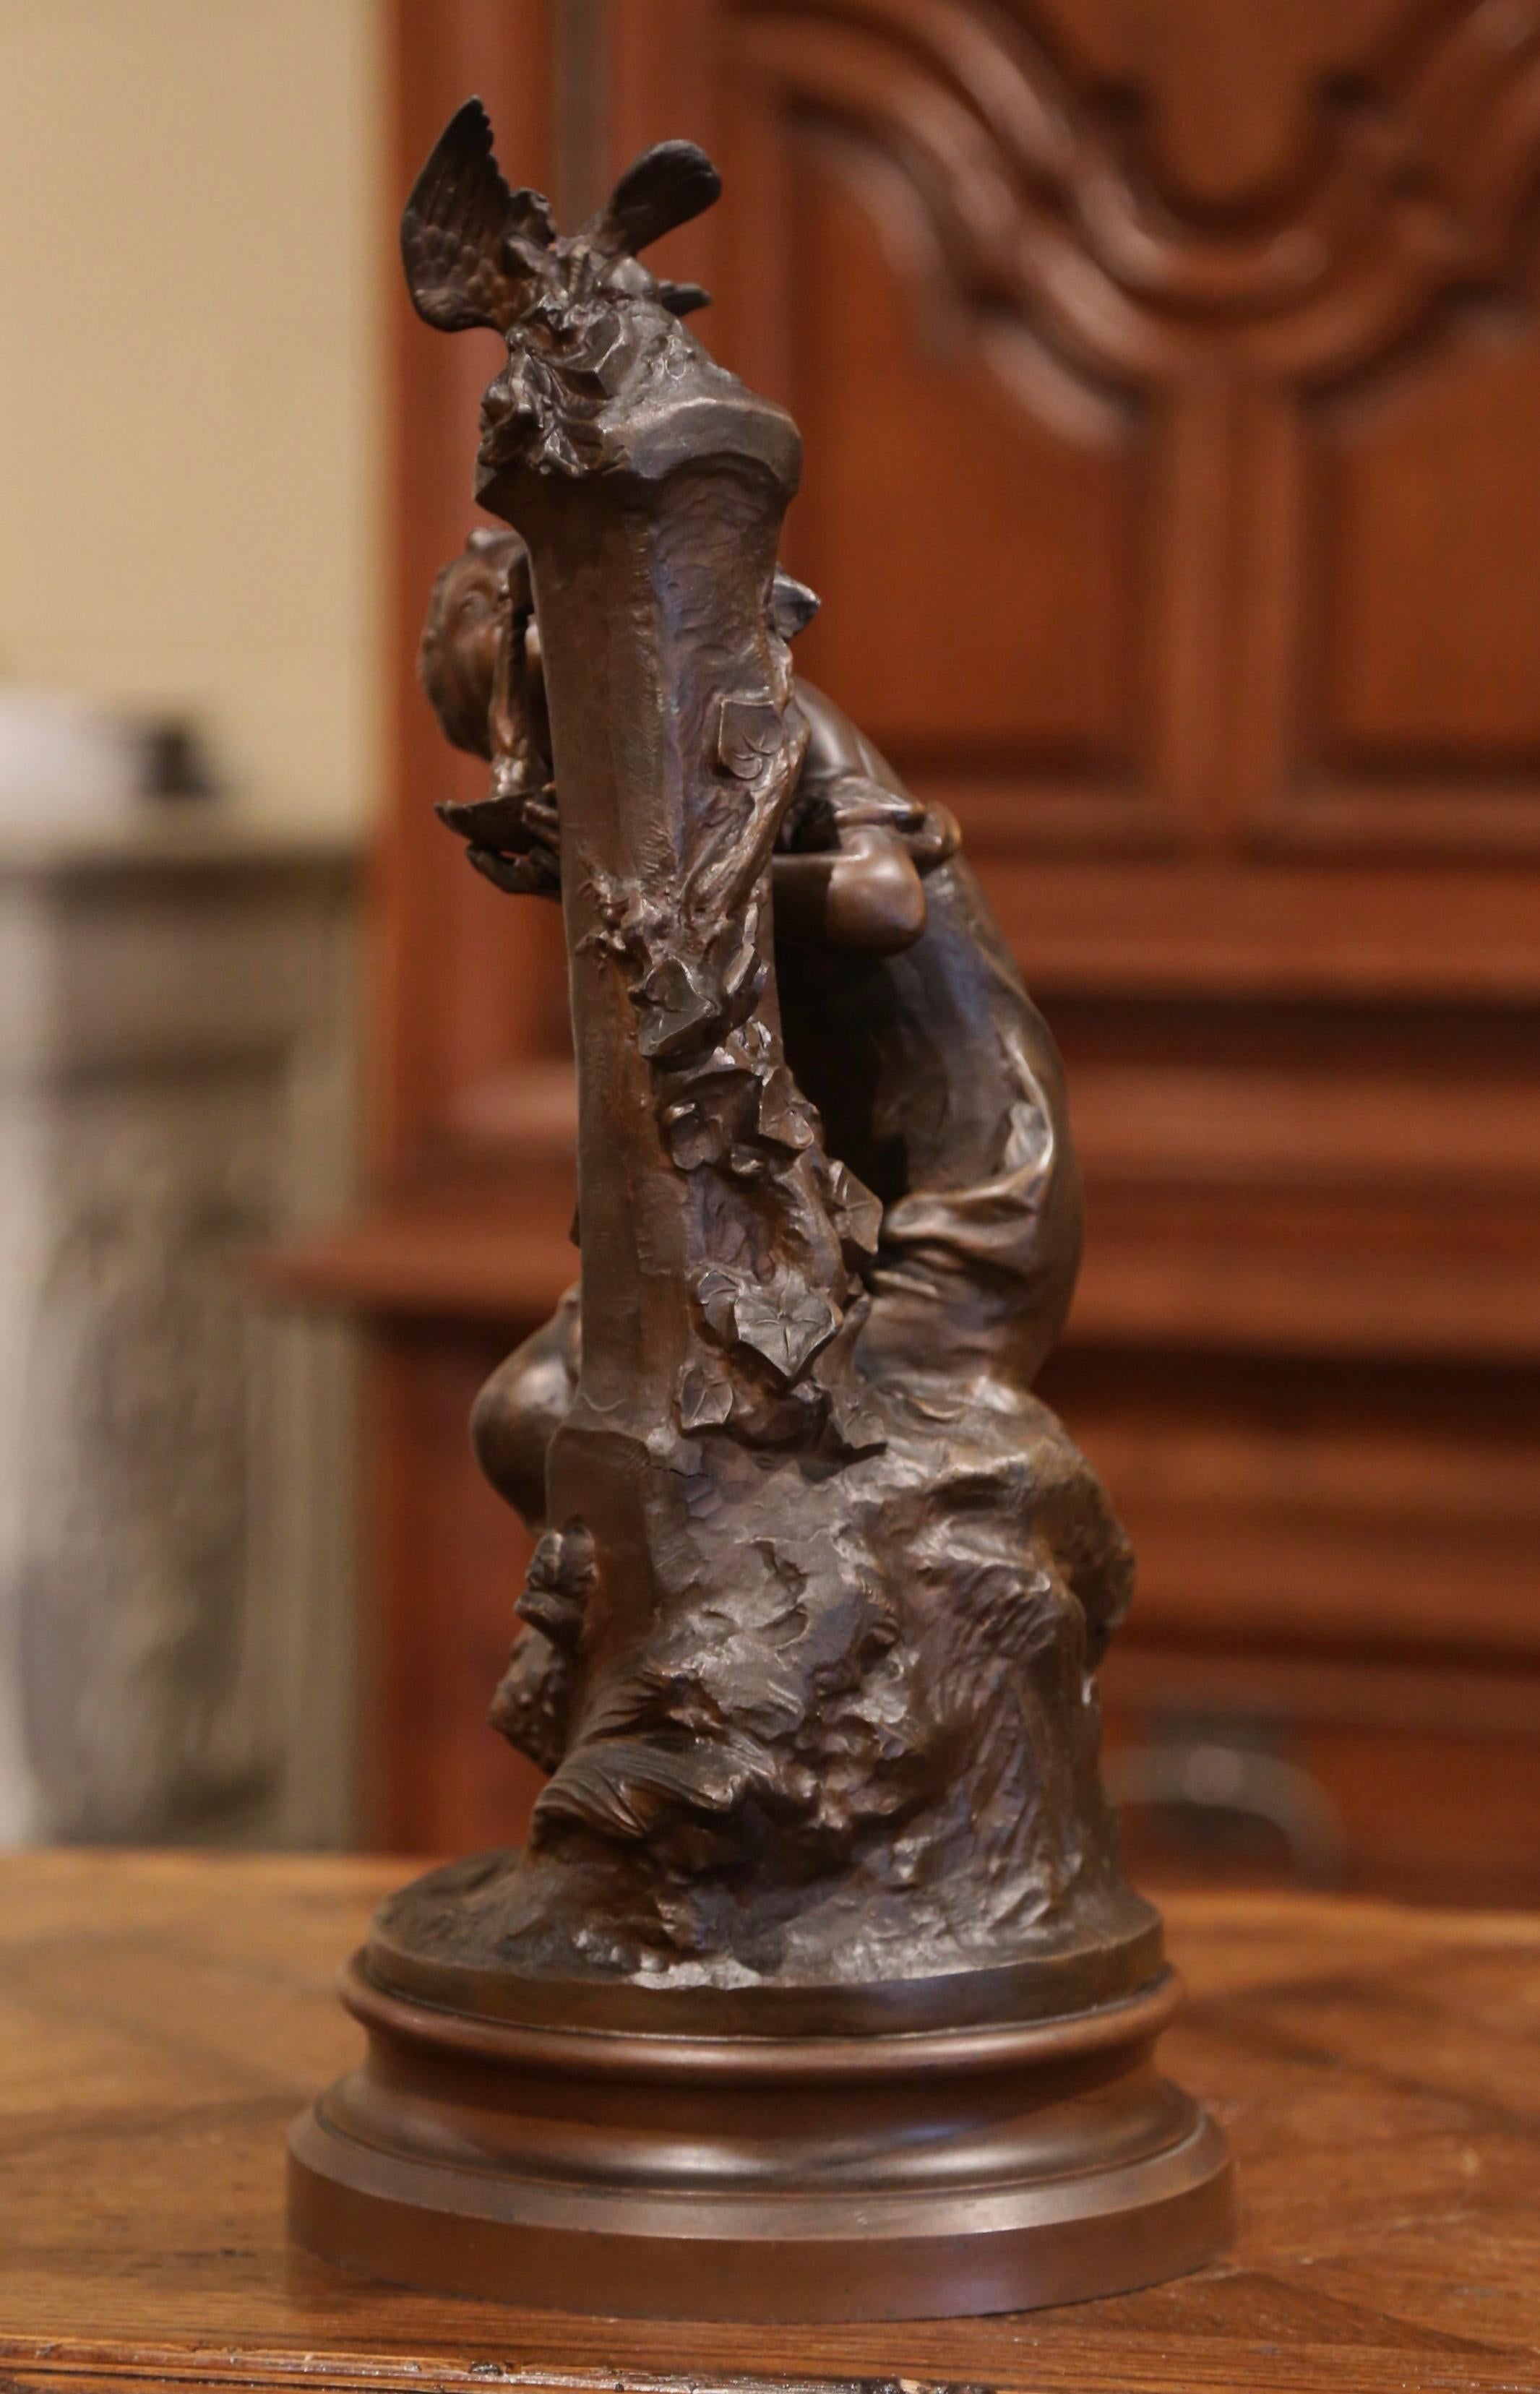 19th Century French Patinated Spelter Sculpture Signed Mathurin Moreau 4